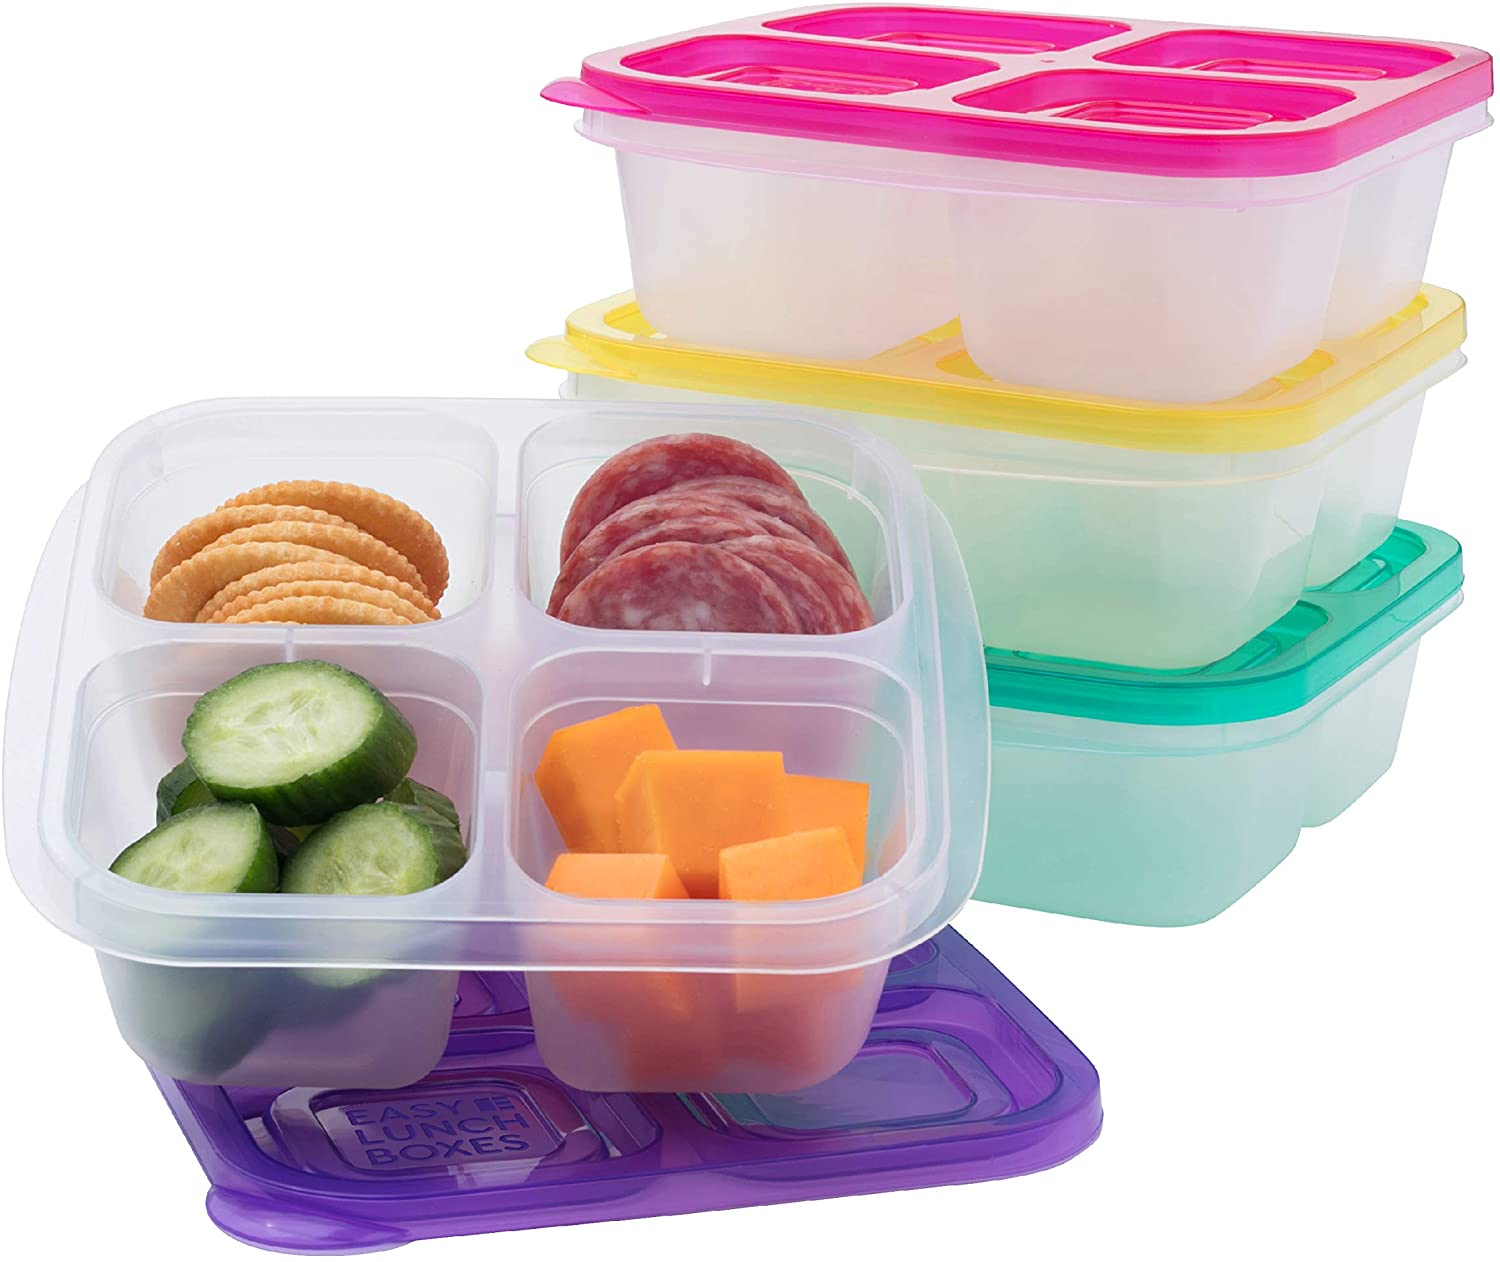 ® - Bento Snack Boxes - Reusable 4-Compartment Food Containers for School, Work and Travel, Set of 4, Brights